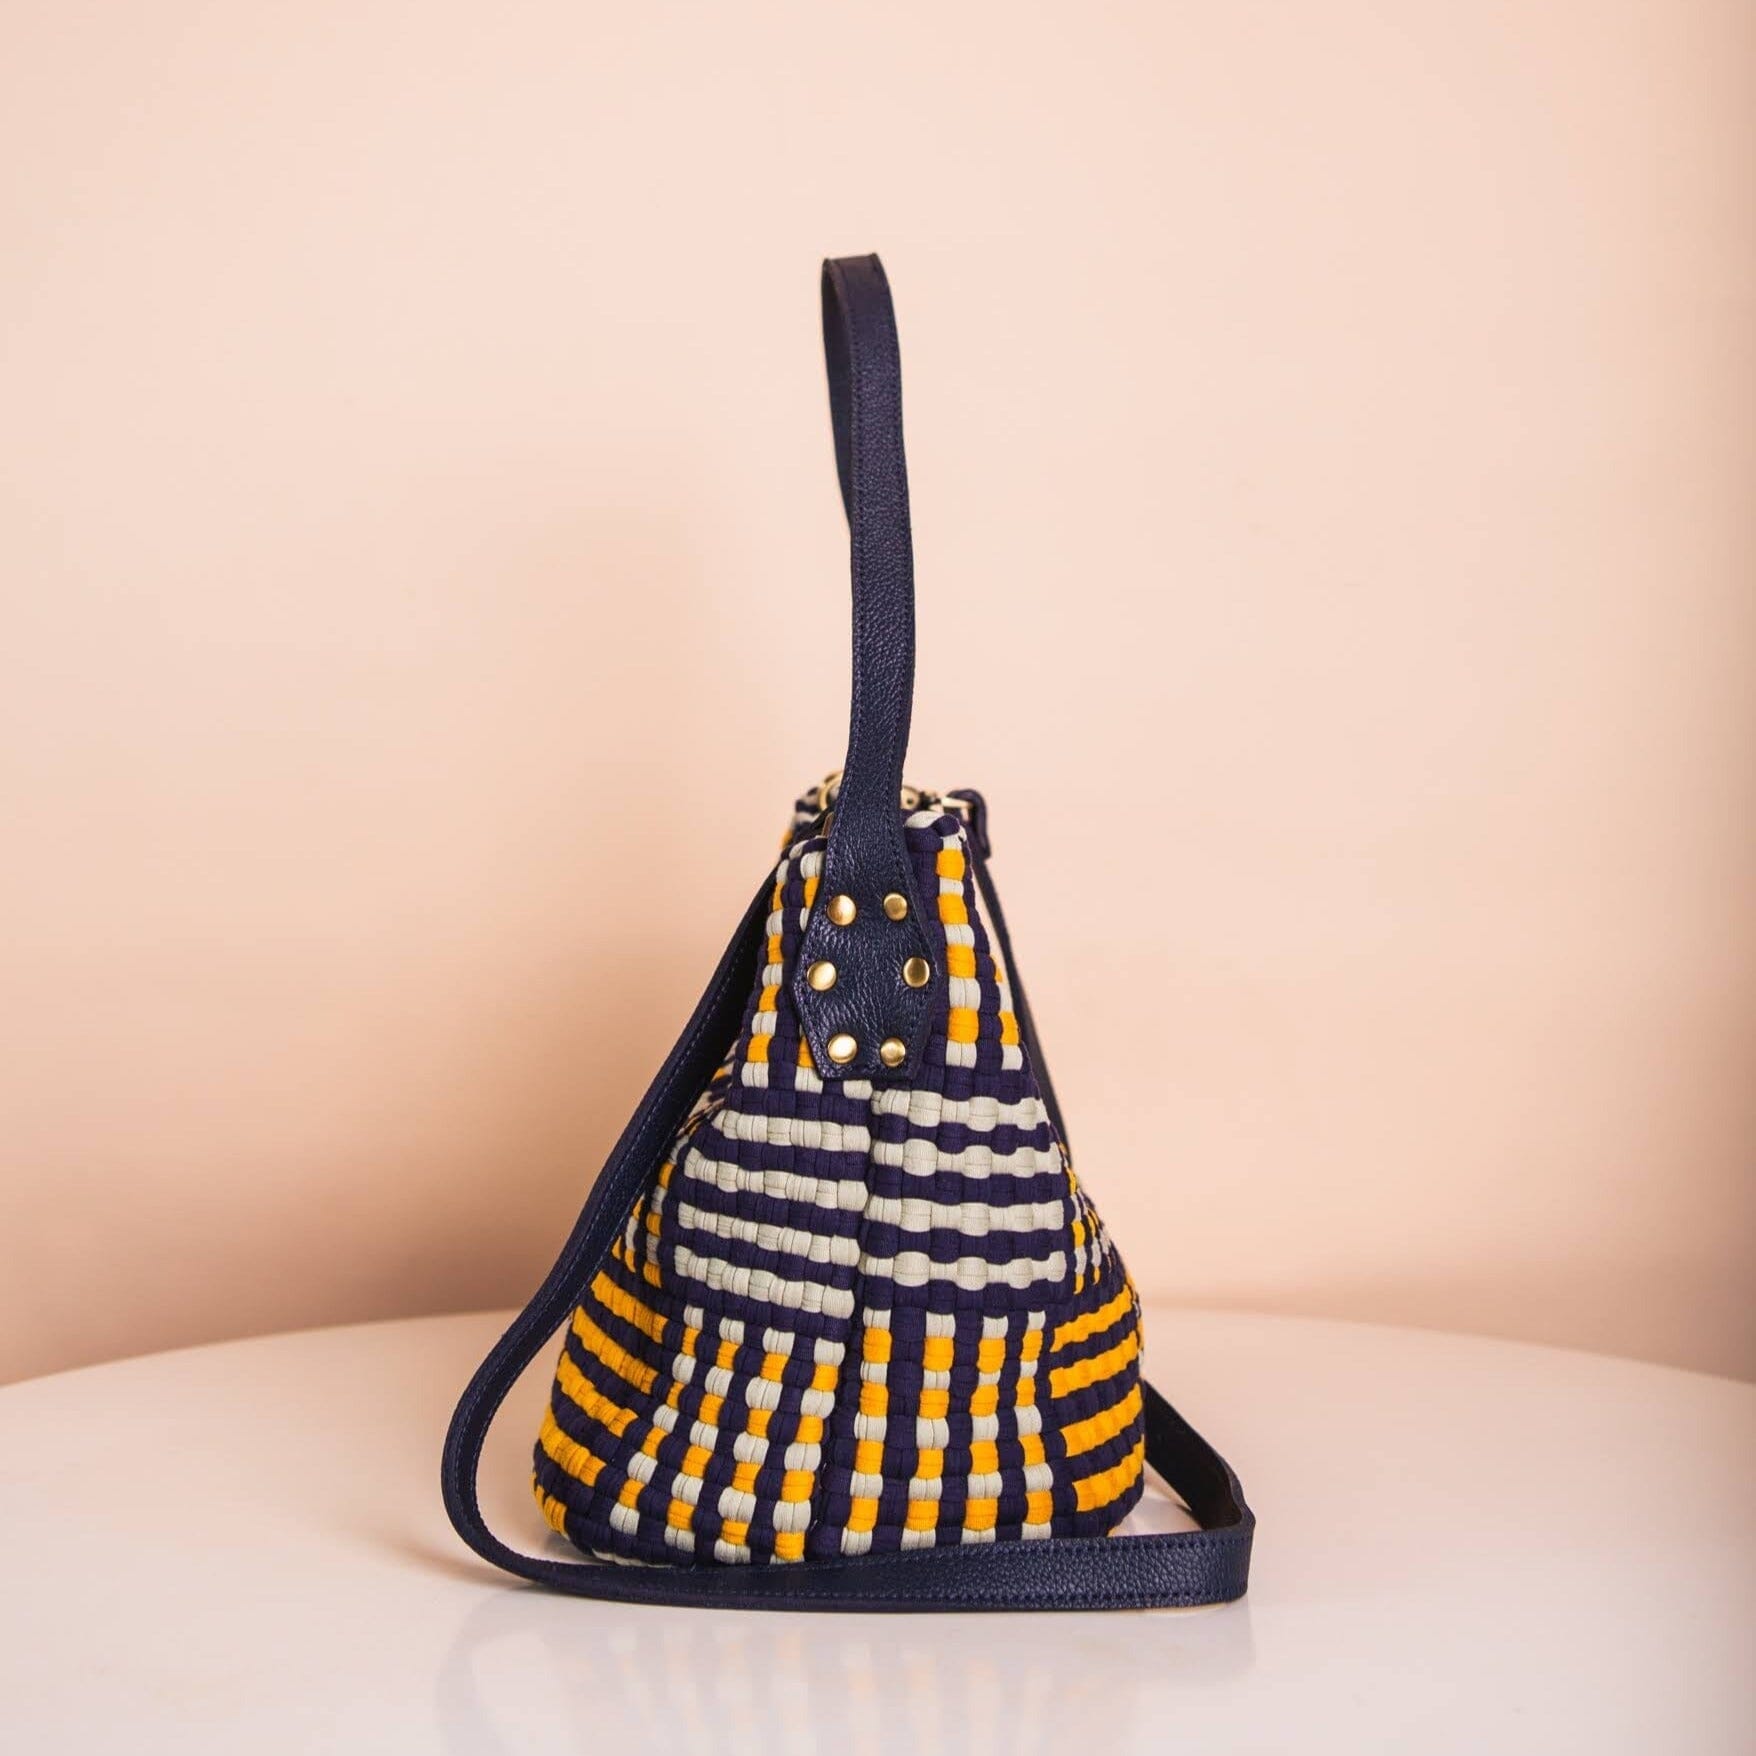 Buslo Mini Mat Pattern Navy & Yellow with Longer Handle Fashion Rags2Riches